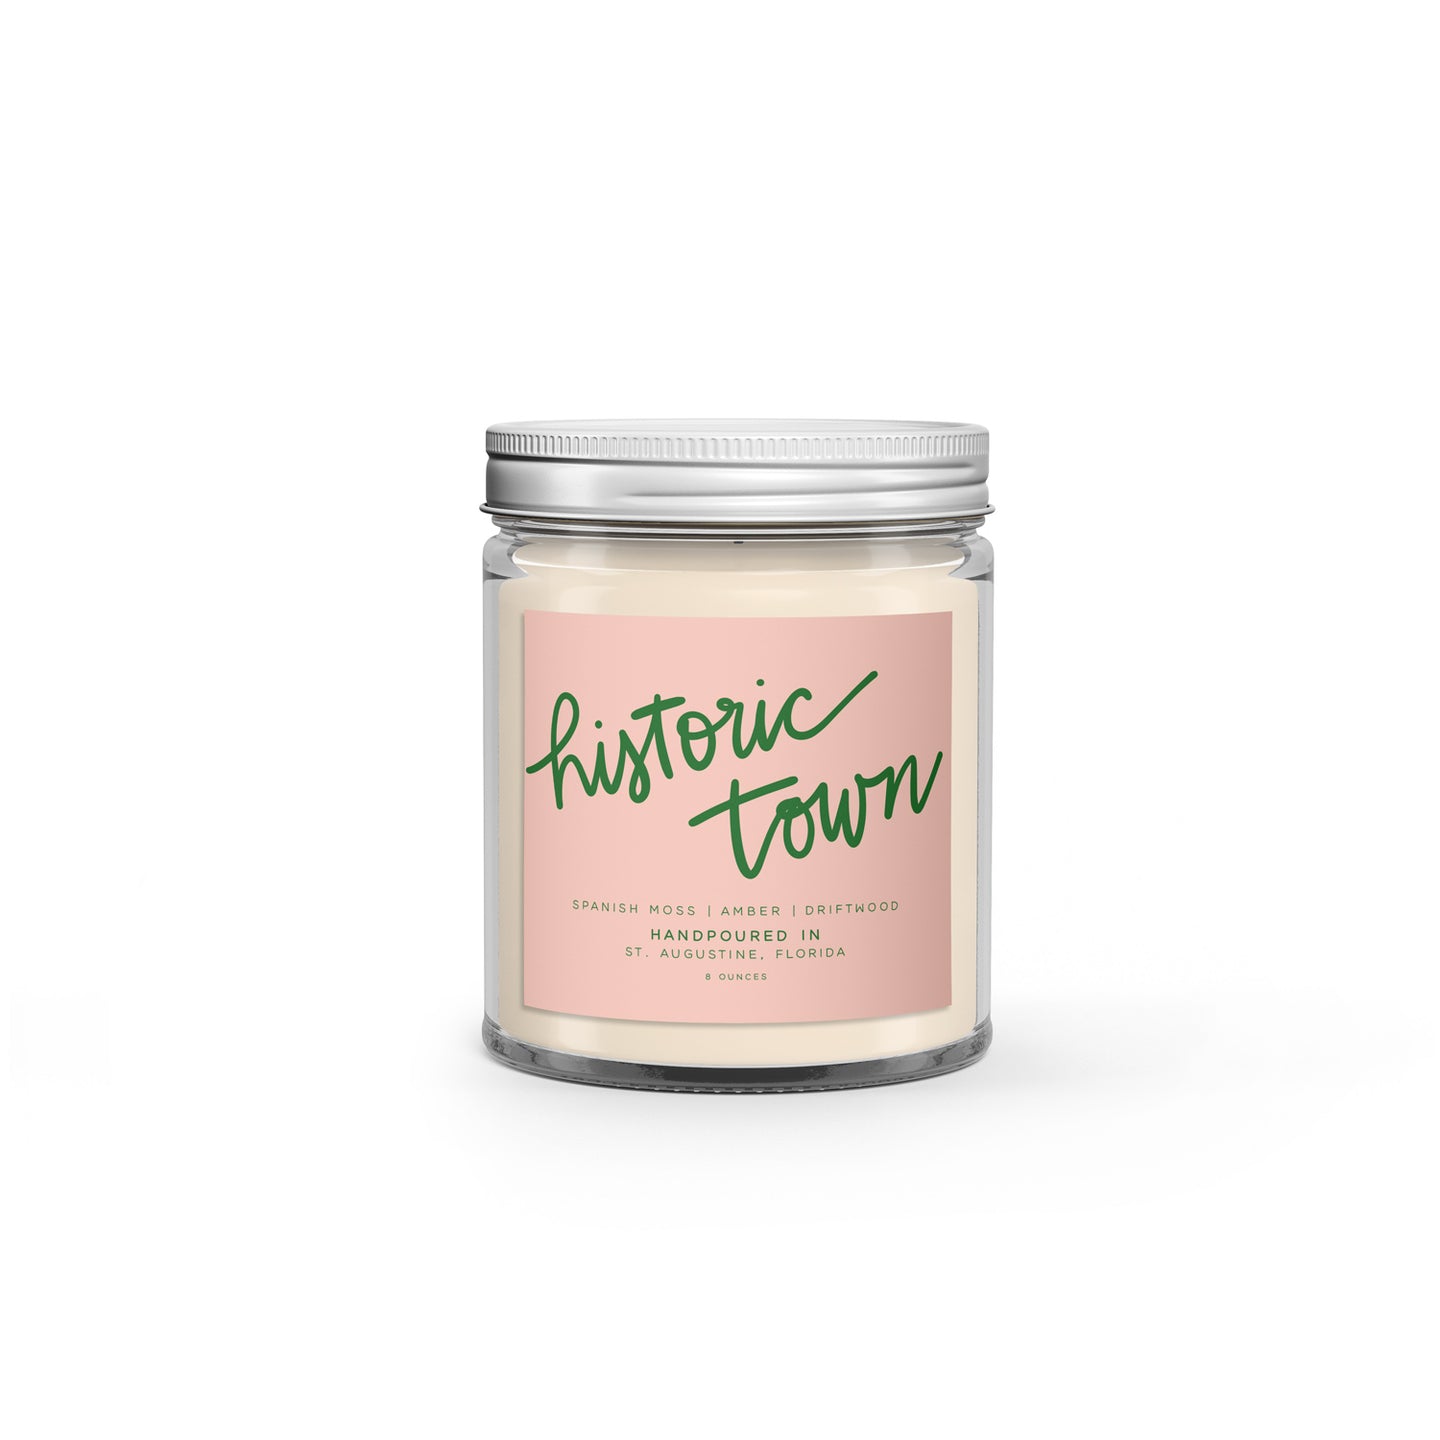 Historic Town: 8 oz Soy Wax Hand-Poured Candle